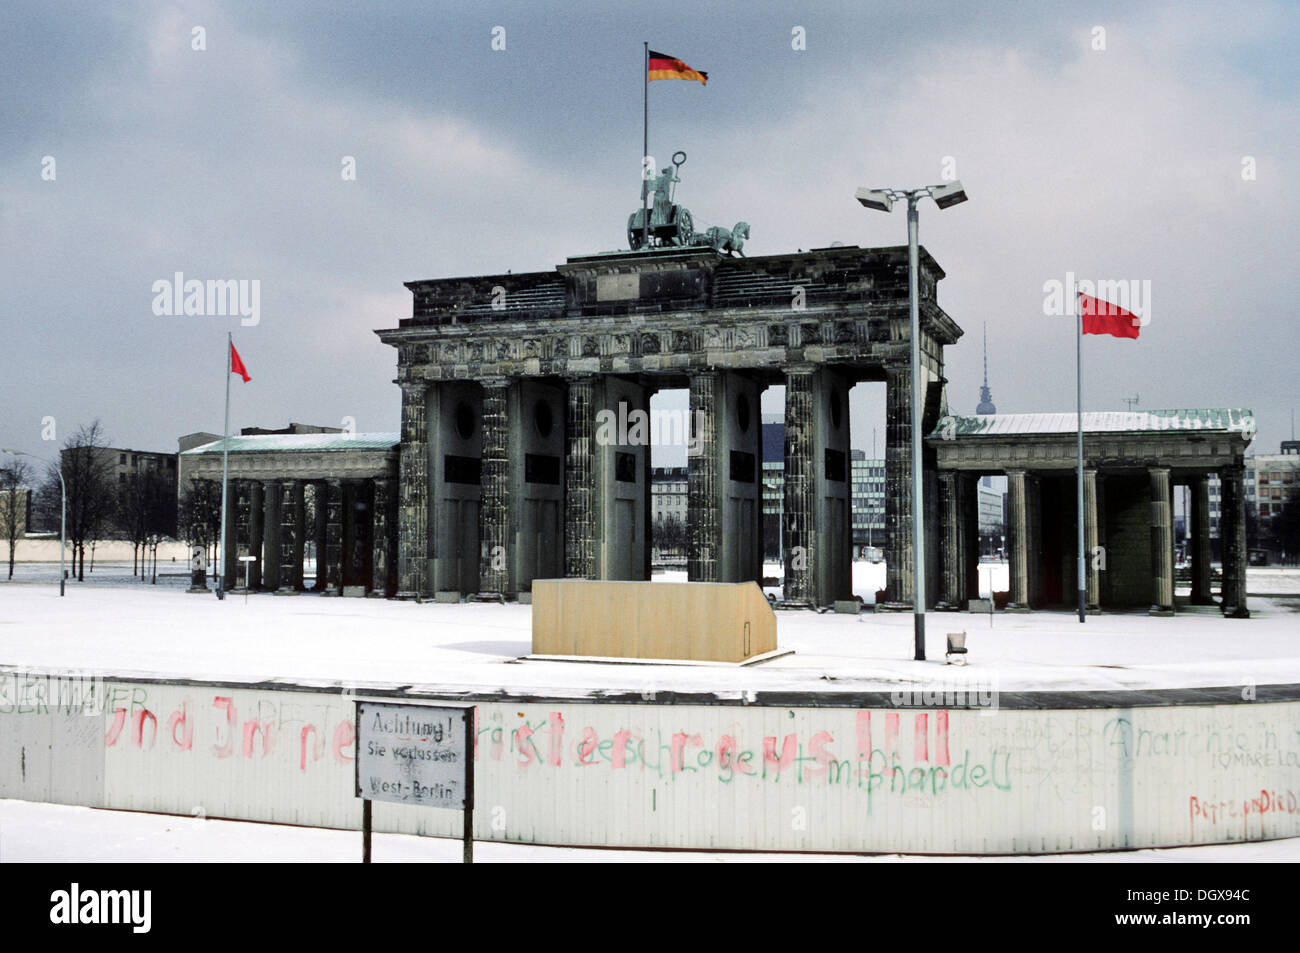 Brandenburg Gate Berlin Wall High Resolution Stock Photography And Images Alamy